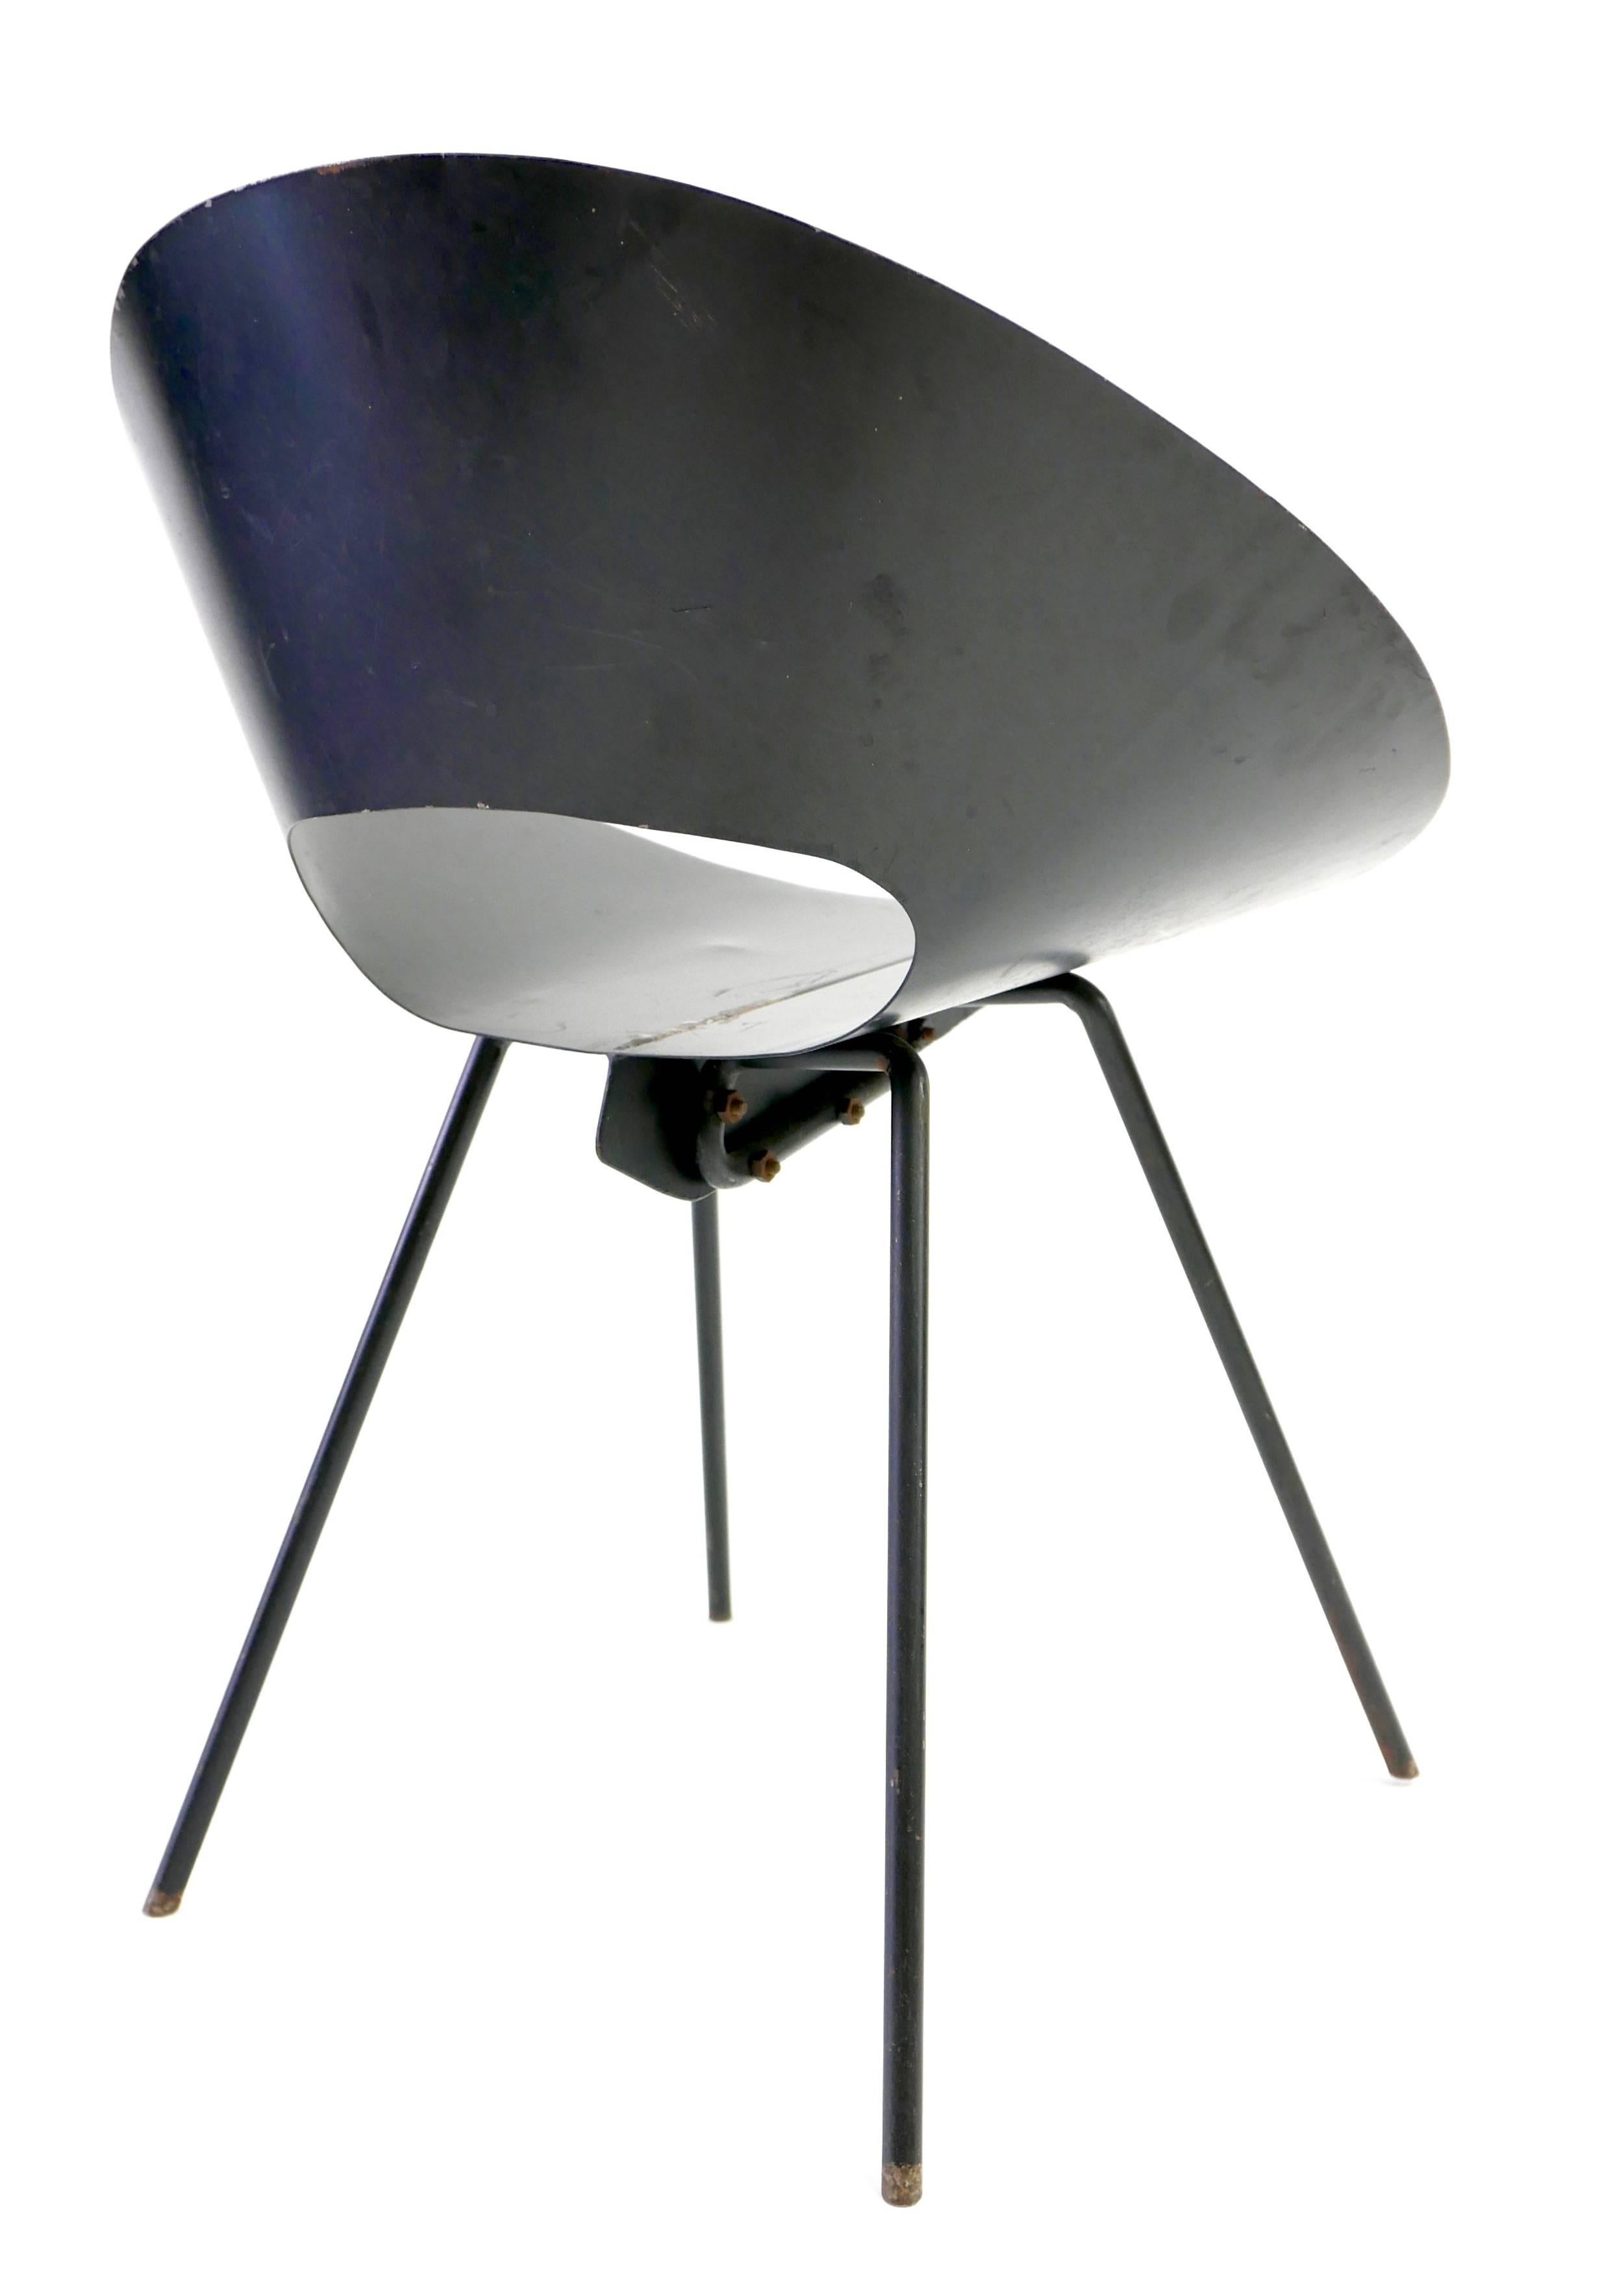 20th Century Donald Knorr Chairs for Knoll Assosiates